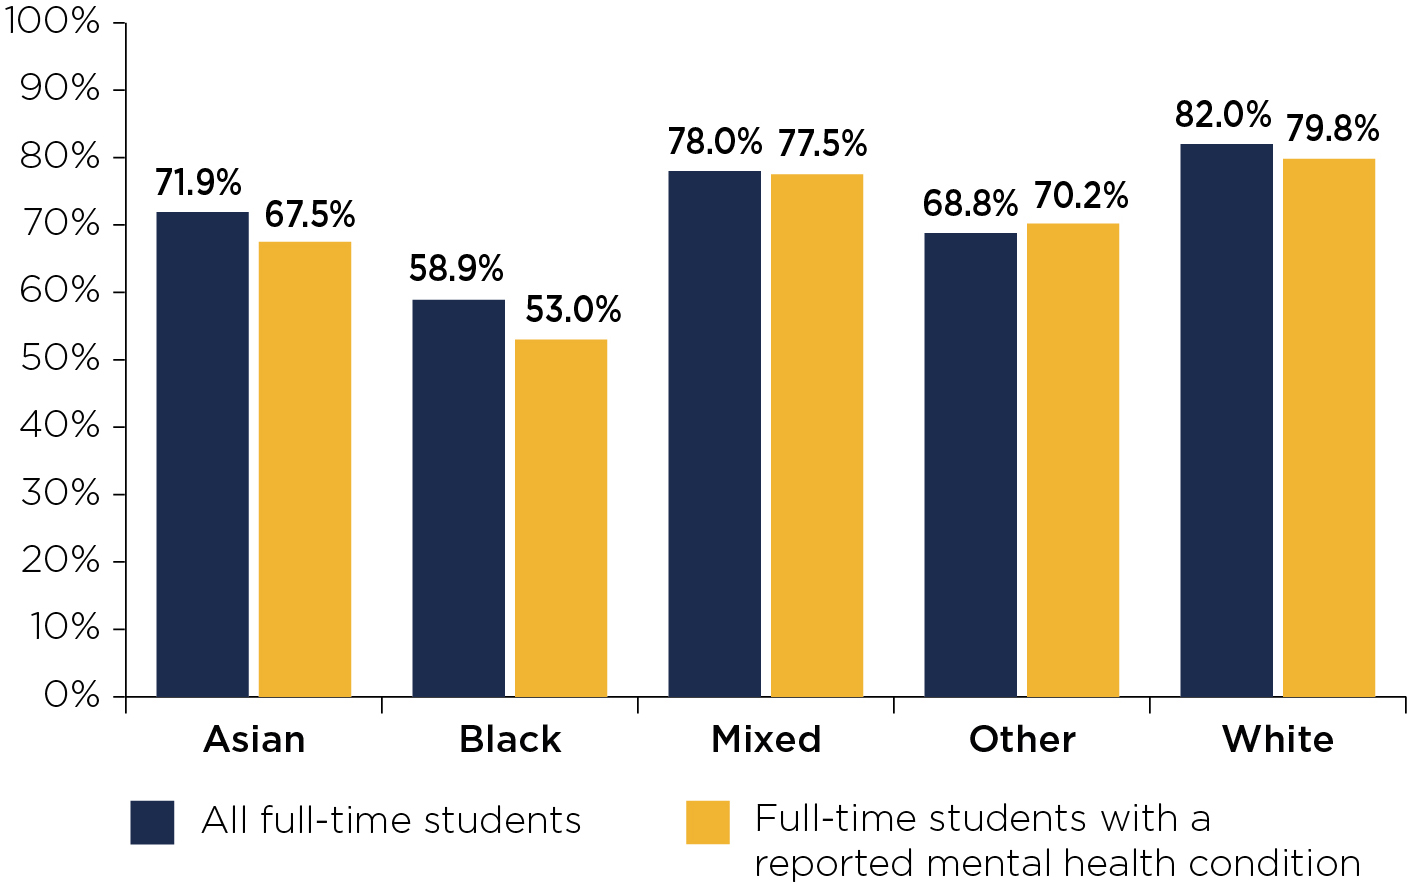 Figure 3: Attainment rates of full-time students graduating in 2017-18 by ethnicity